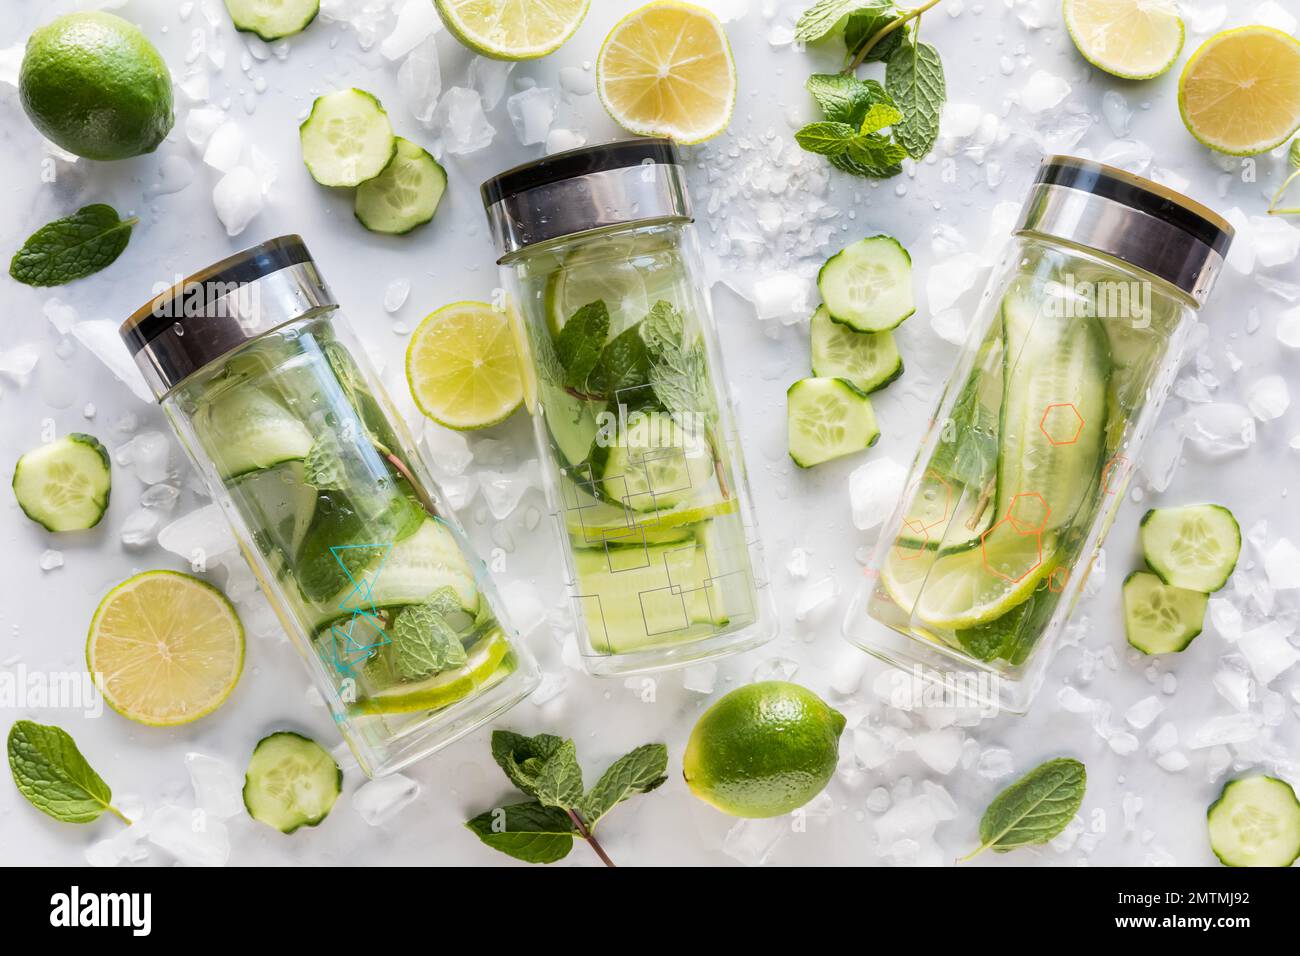 Glass bottles of cucumber water with lime and mint mixed in. Stock Photo